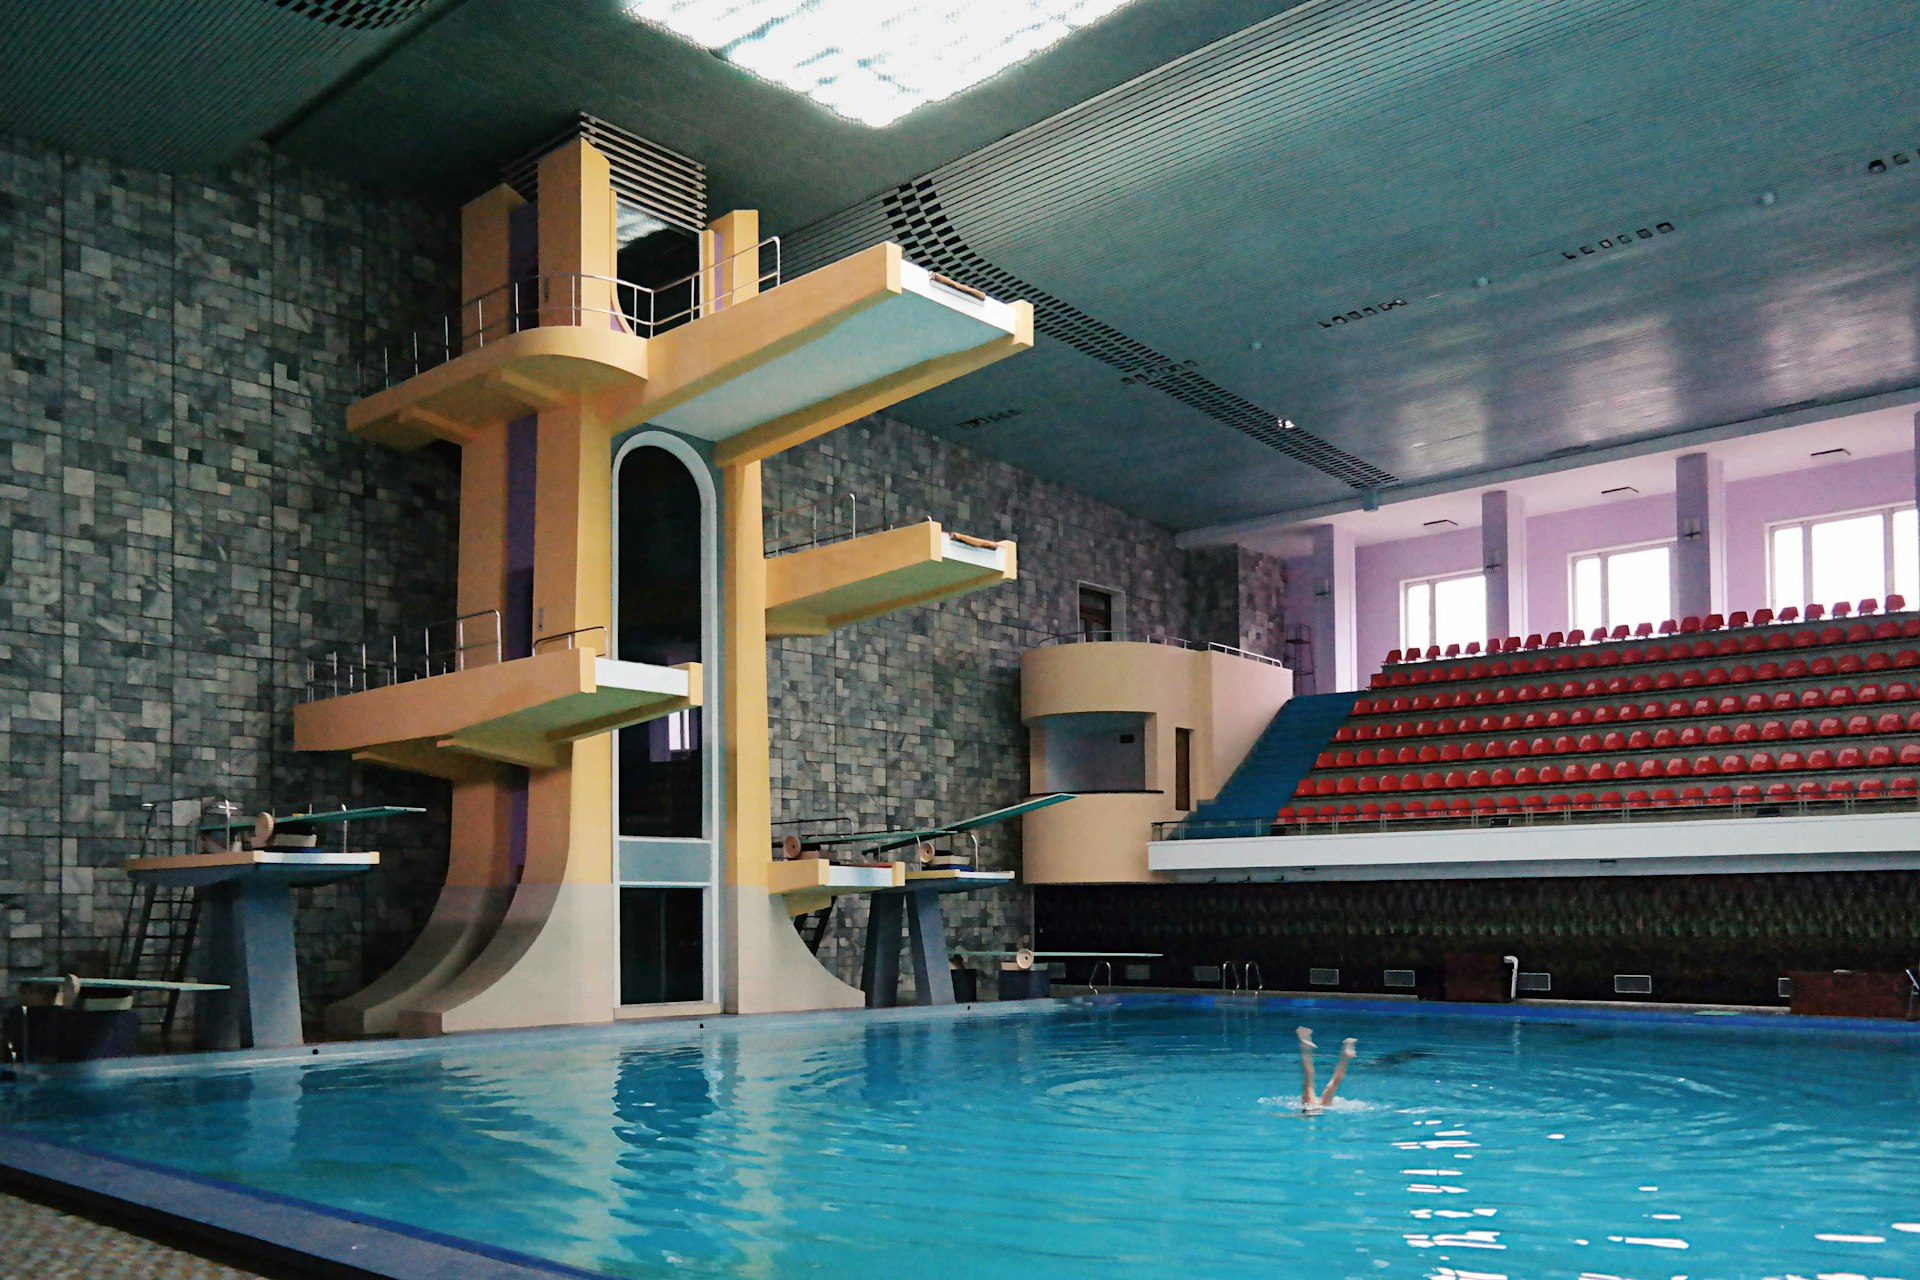 The Changgwang Health and Recreation Complex was the city’s flagship health centre when it opened in 1980. Covering an area of almost 40,000 square metres, it contains a sauna, bathhouse, swimming pools and hair salons – where customers can choose from a range of officially sanctioned haircuts. In a futuristic touch, the diving boards are reached by a mechanical elevator in a shaft faced with smoked glass.